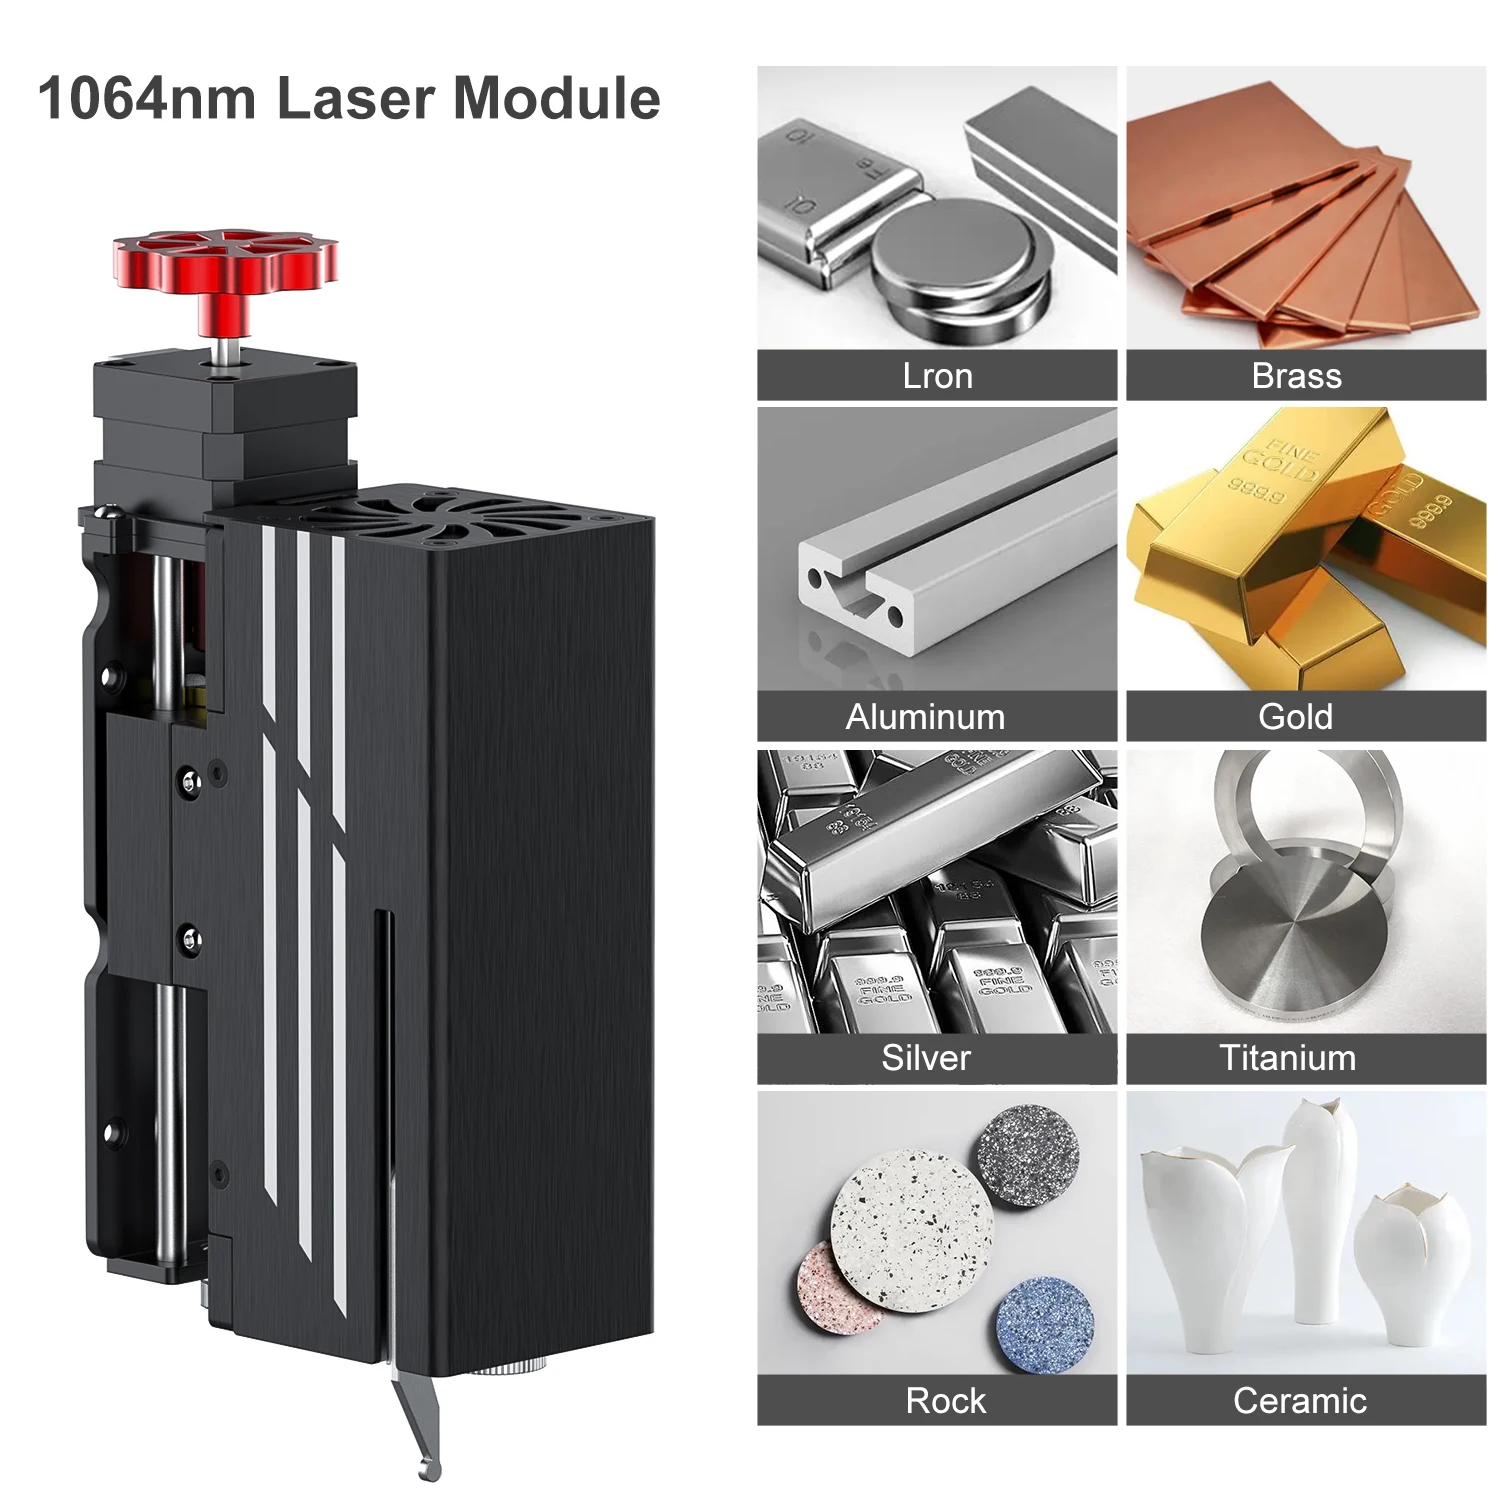 TwoTrees T20 Laser Module For TS2 Laser Engraver 1064nm Red Laser For Engraving Metal Acrylic Glass Gold Jewelry Rings Bracelet